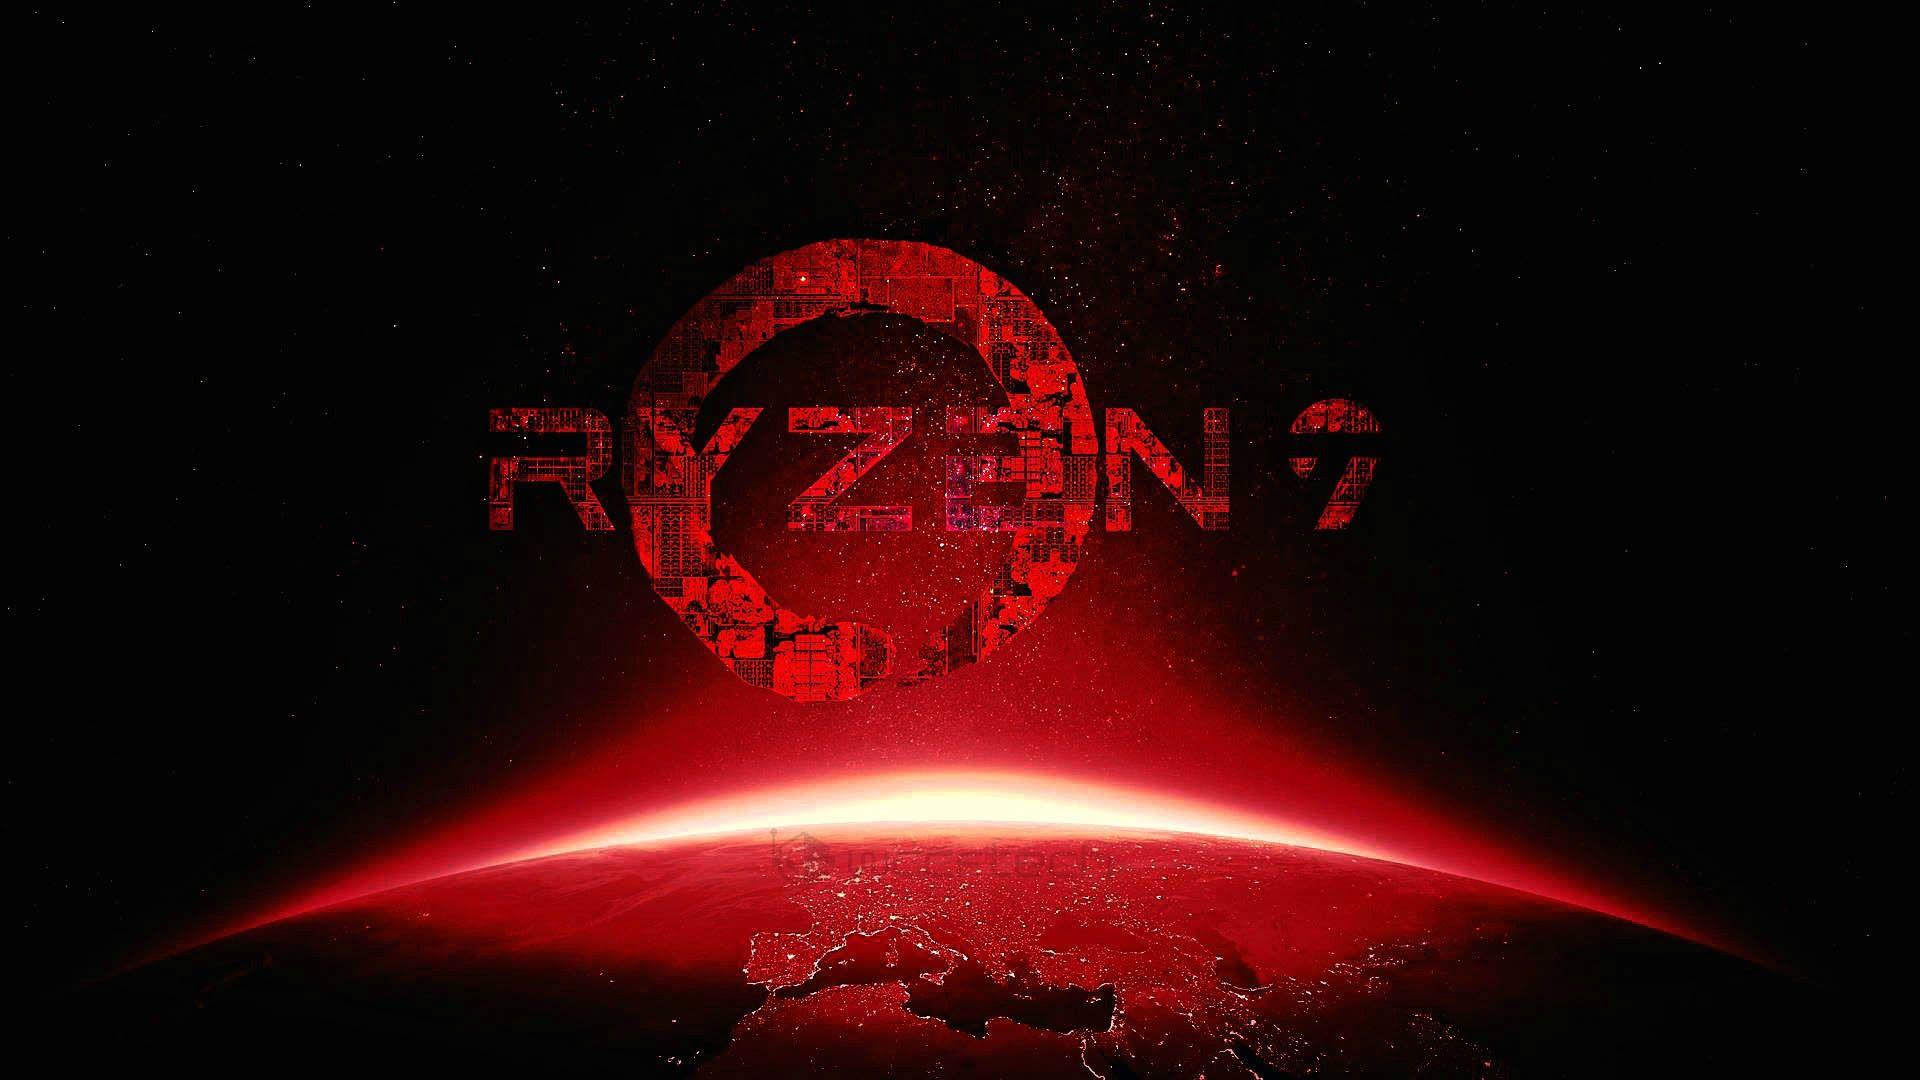 Full AMD Ryzen 9 Threadripper Lineup Leaked, up to 16 Cores & 4.1GHz With Quad Channel DDR4 Support & 44 PCIe Lanes